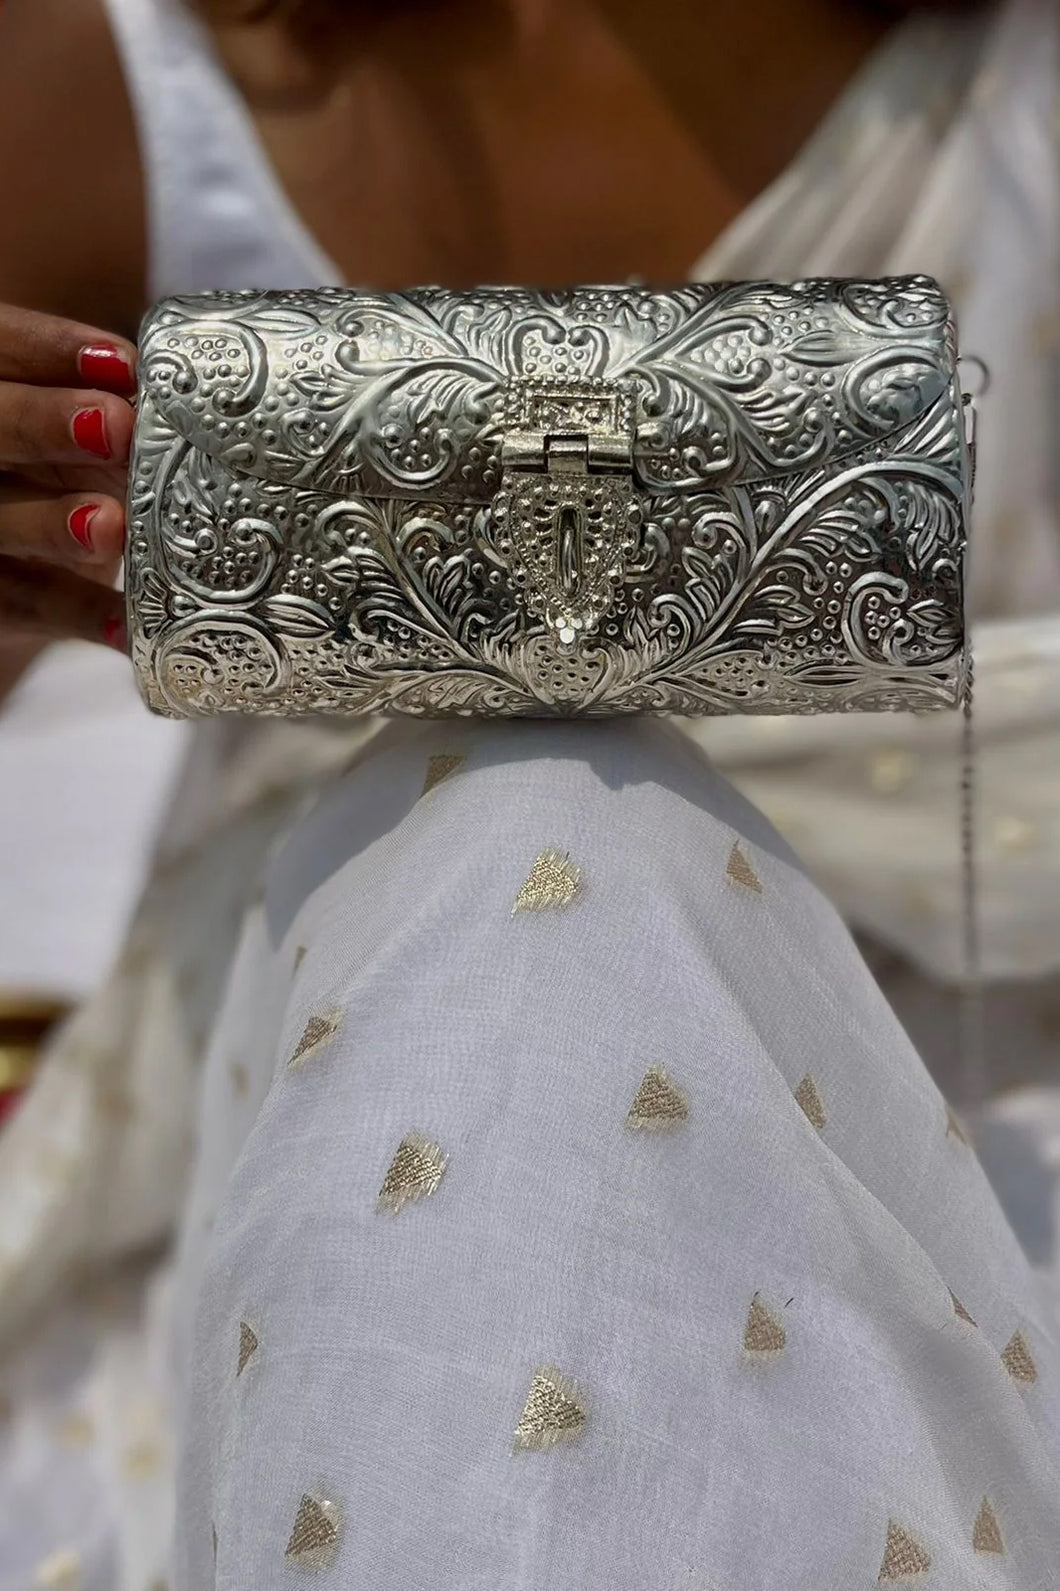 CHARVEE COLLECTIONS Solid Silver Square Piece Silver | Chandi Ka Tukra  Chokor for Wallet, Purse & Locker : Amazon.in: Bags, Wallets and Luggage